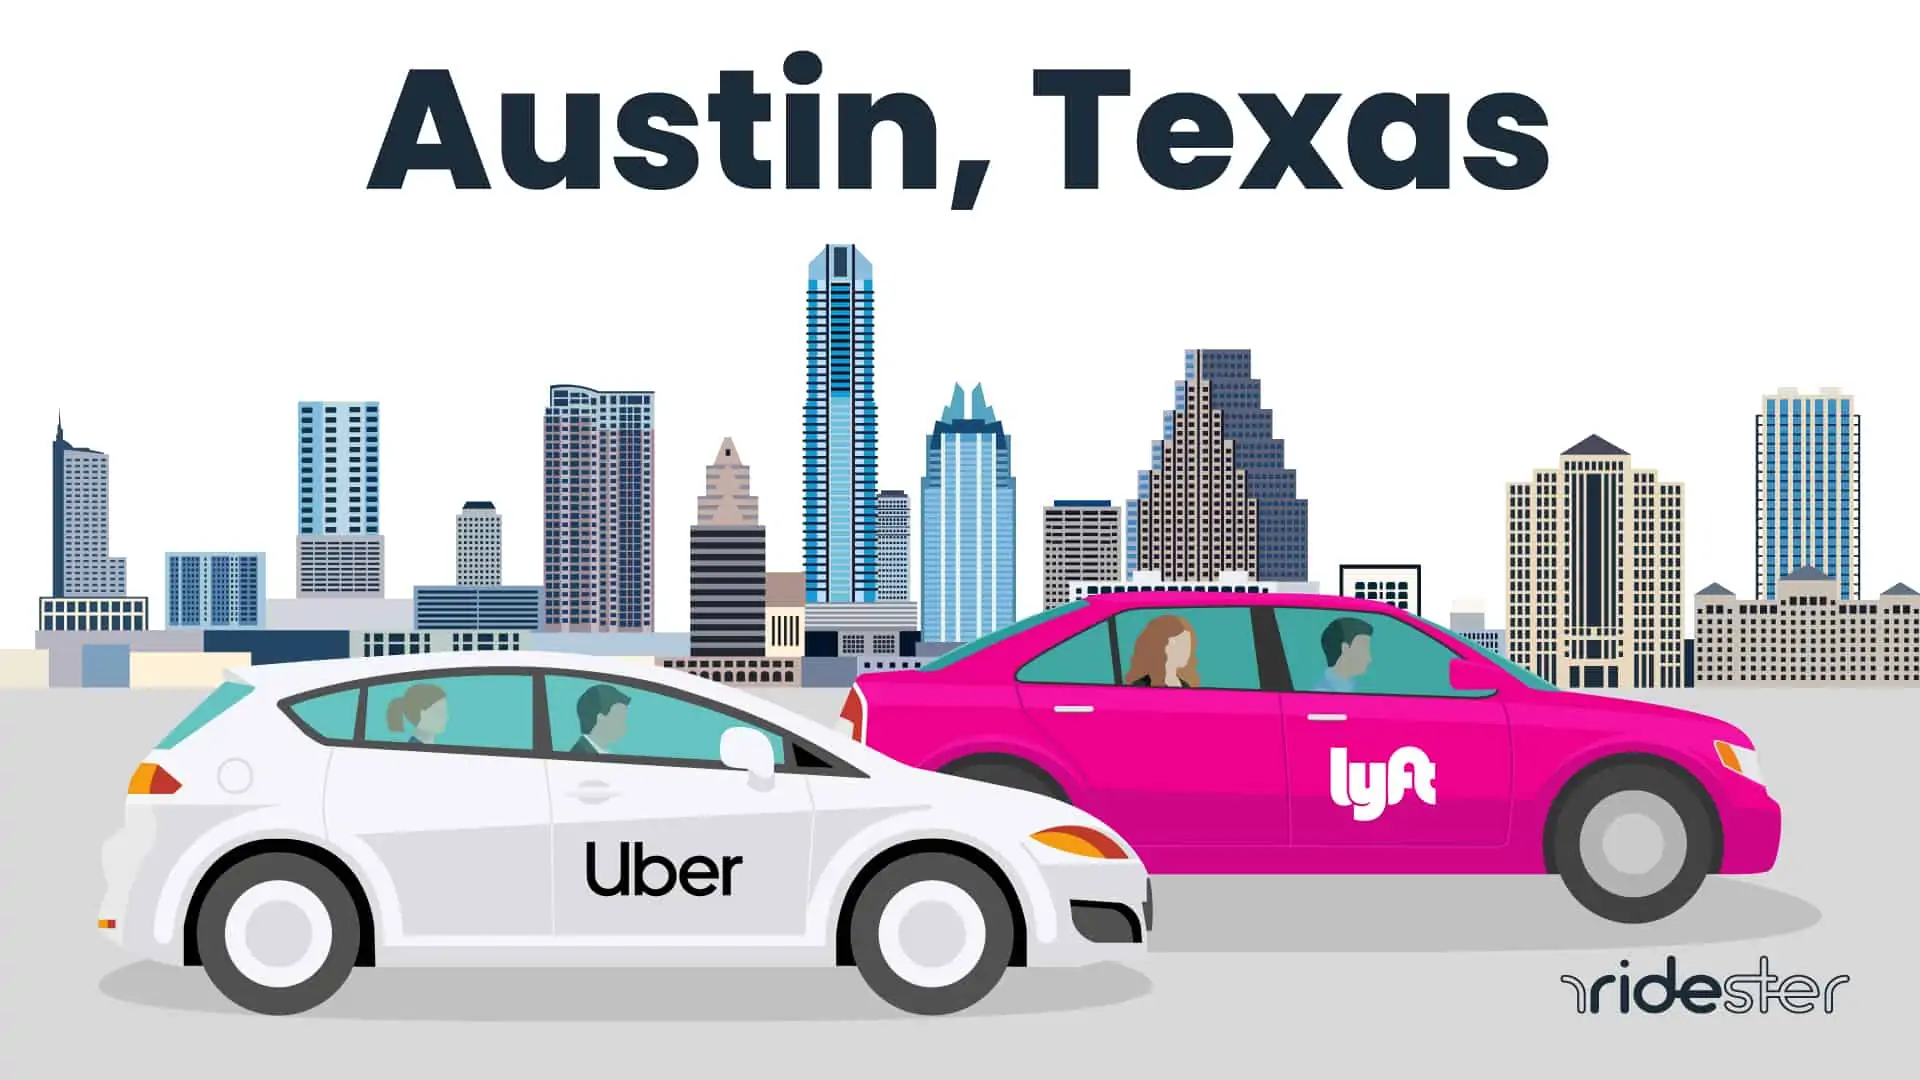 vector graphic showing uber, lyft, and vehicles that do ridesharing in austin